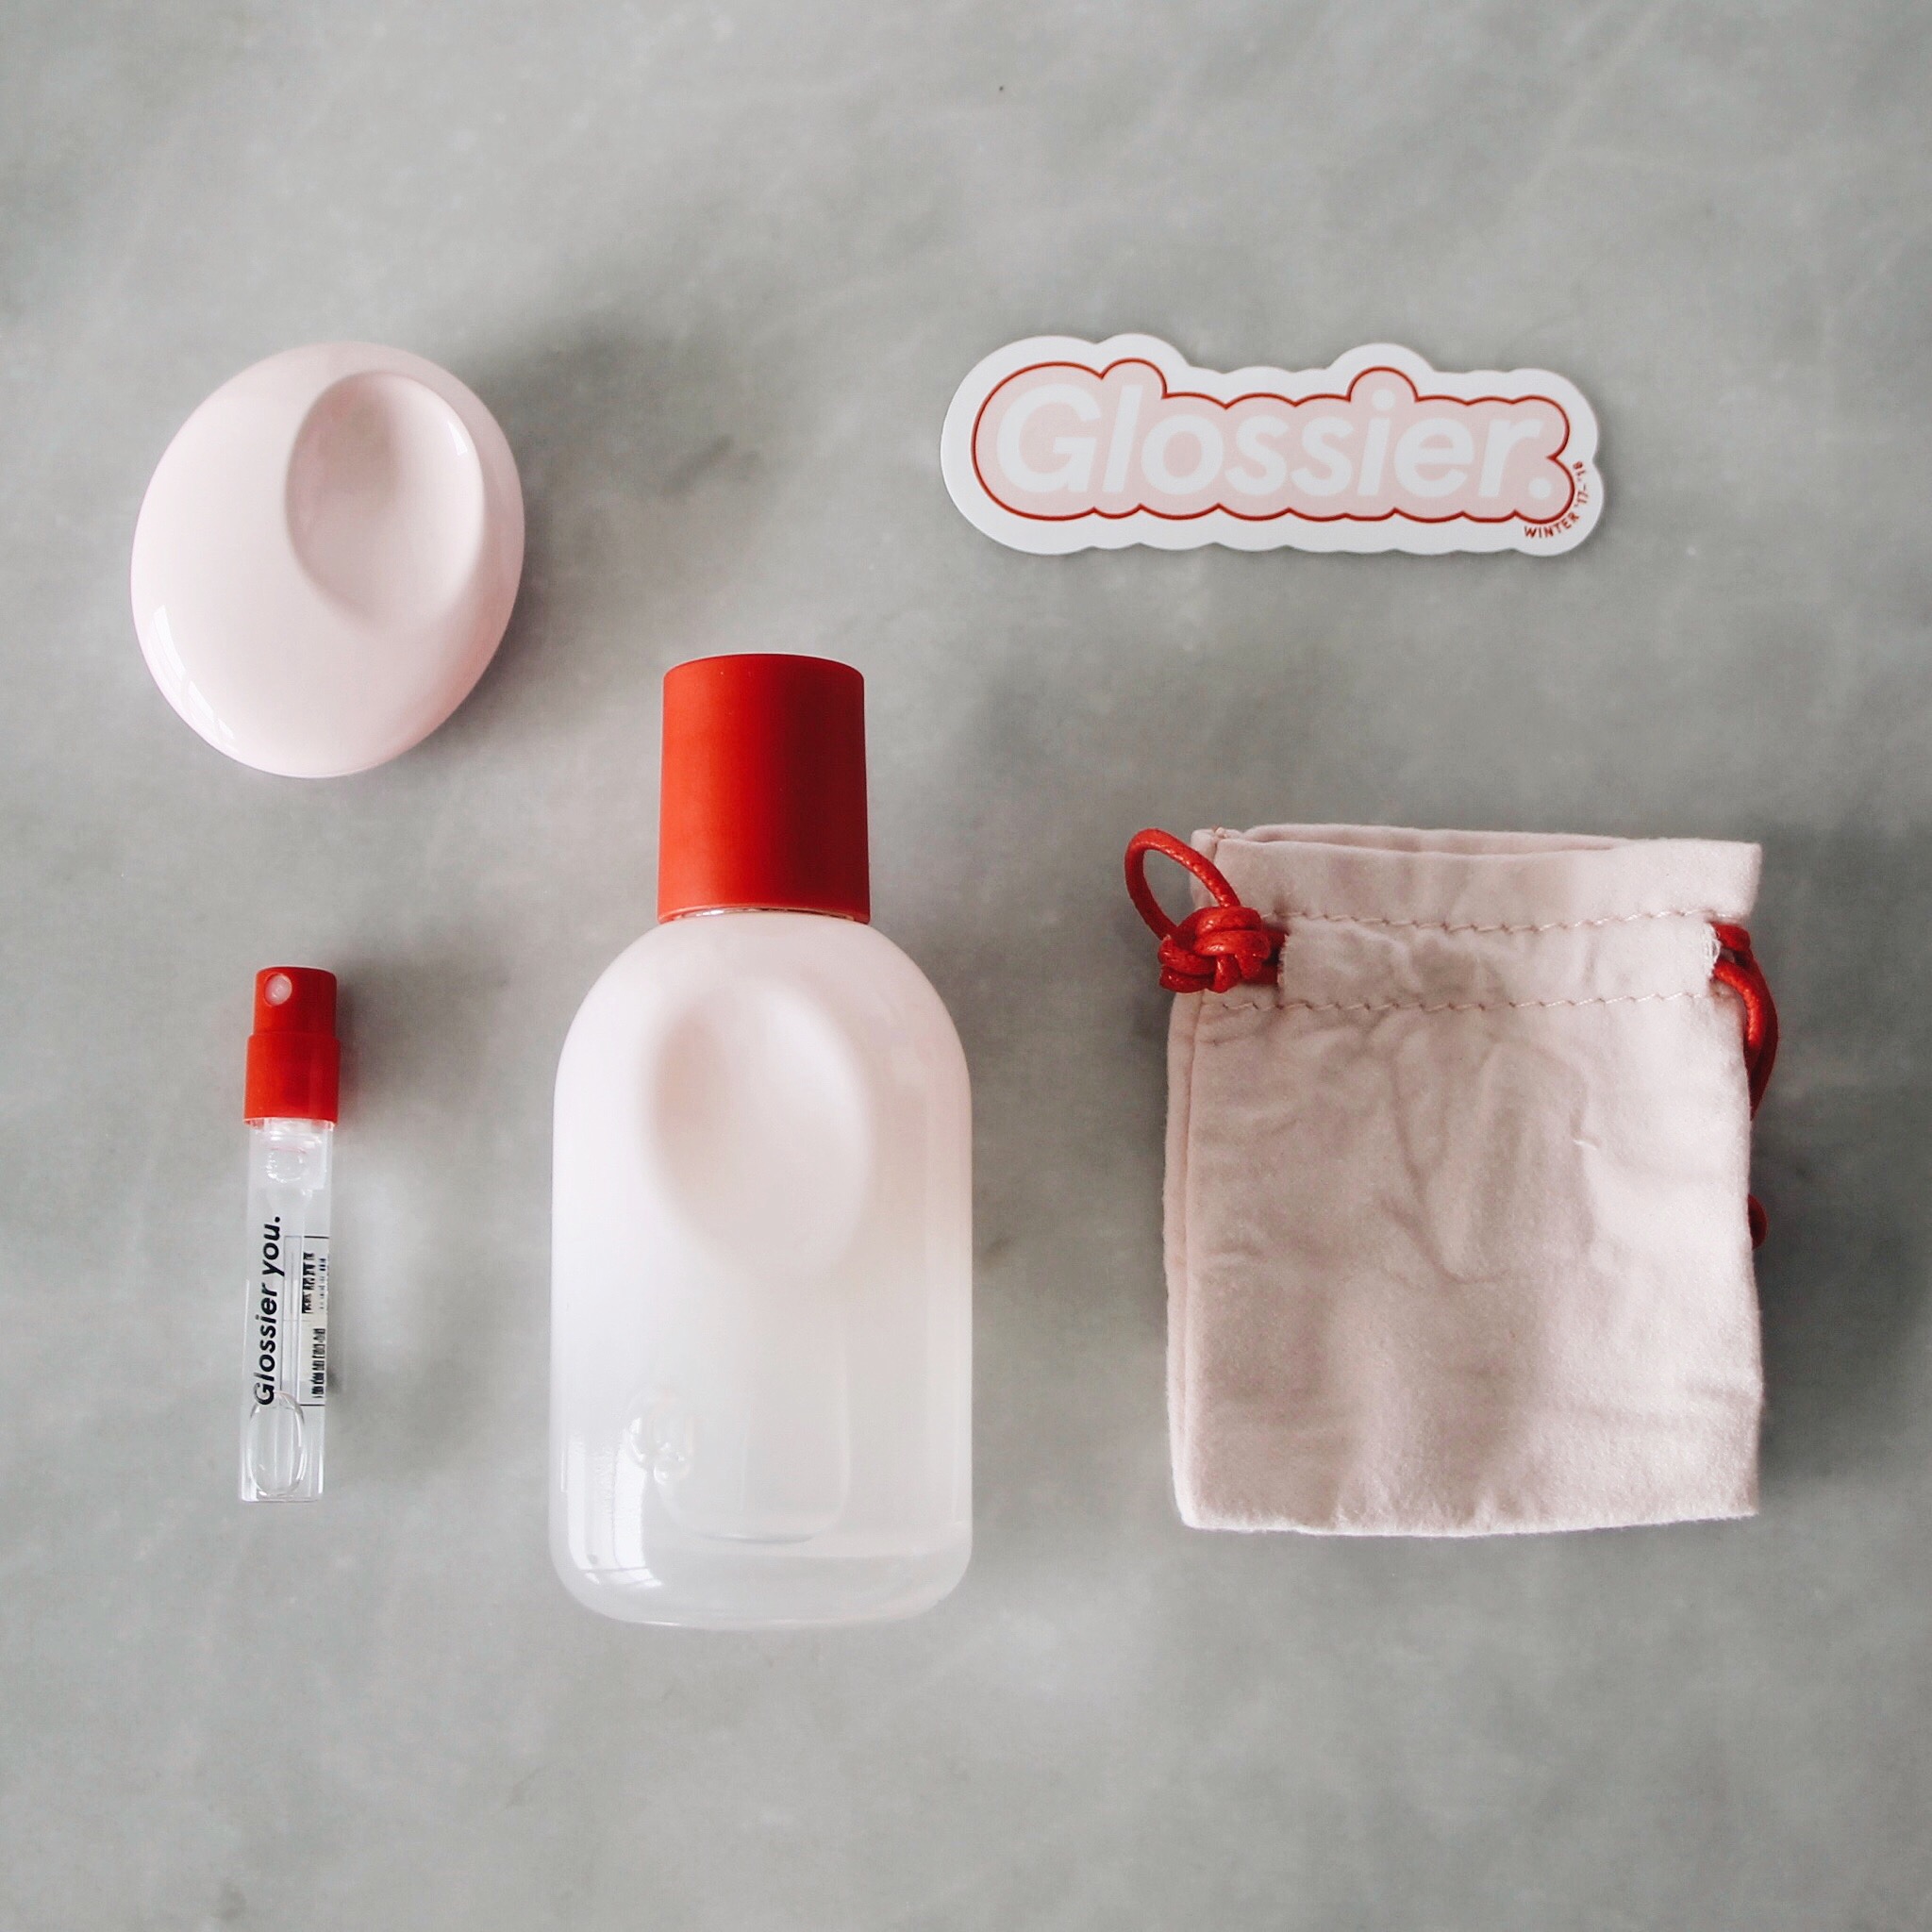 Glossier You, Now In Two Forms